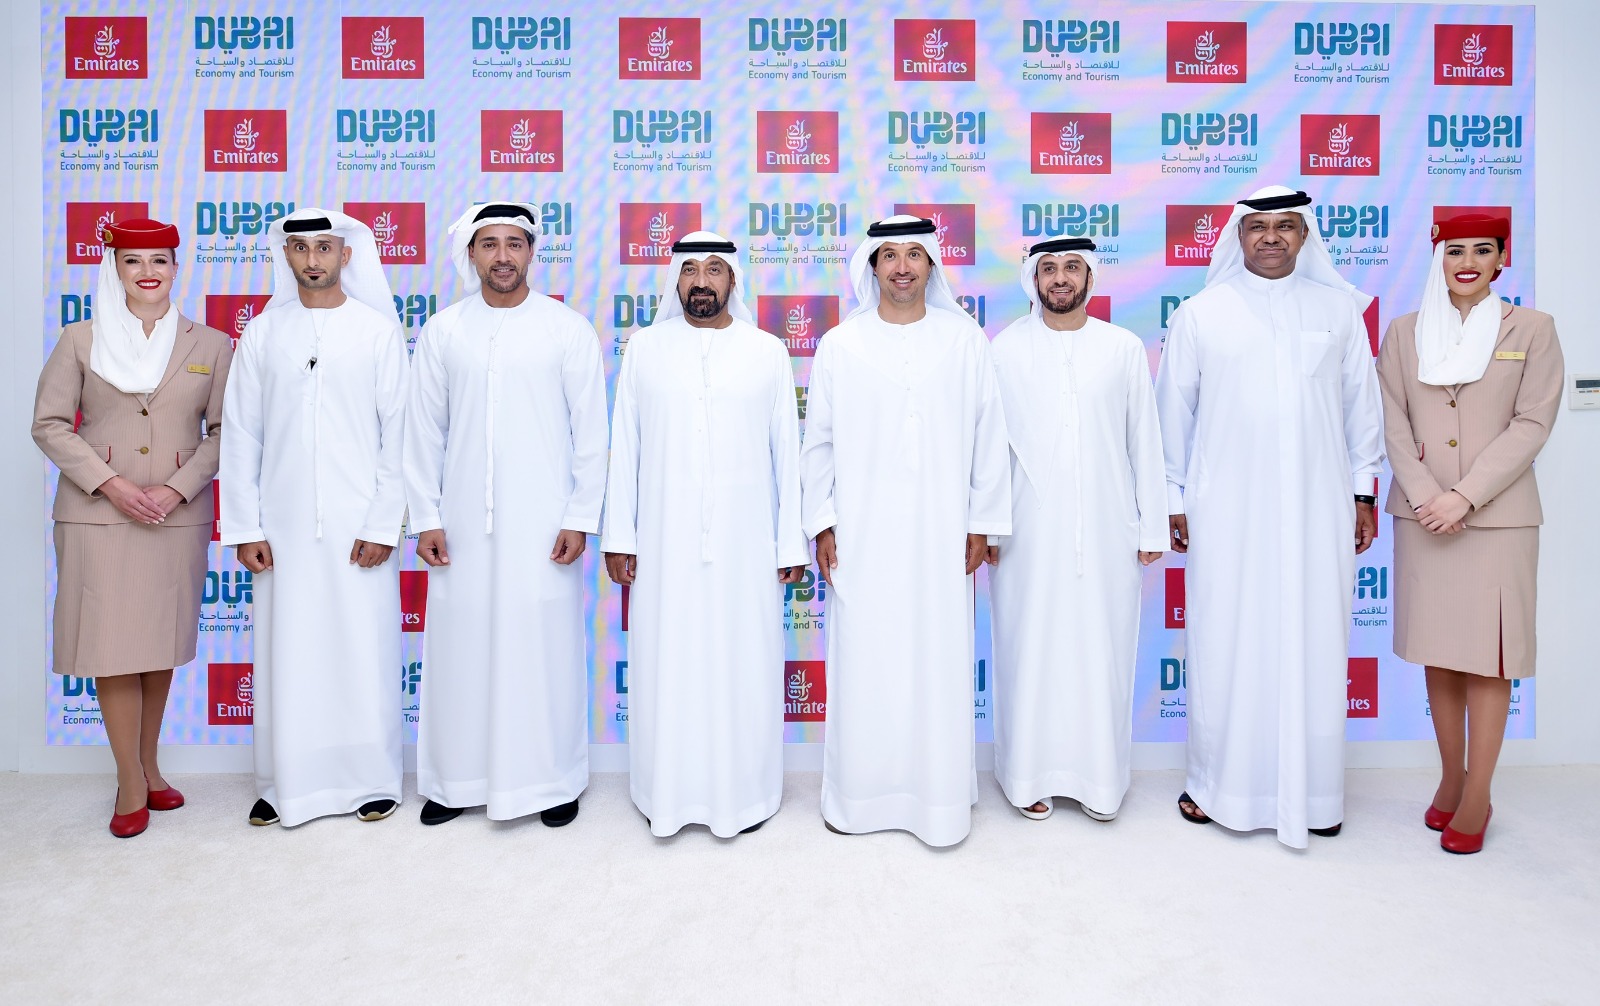 Dubai’s Department of Economy and Tourism and Emirates have strengthened their partnership to enhance Dubai’s position as a premier global business destination.